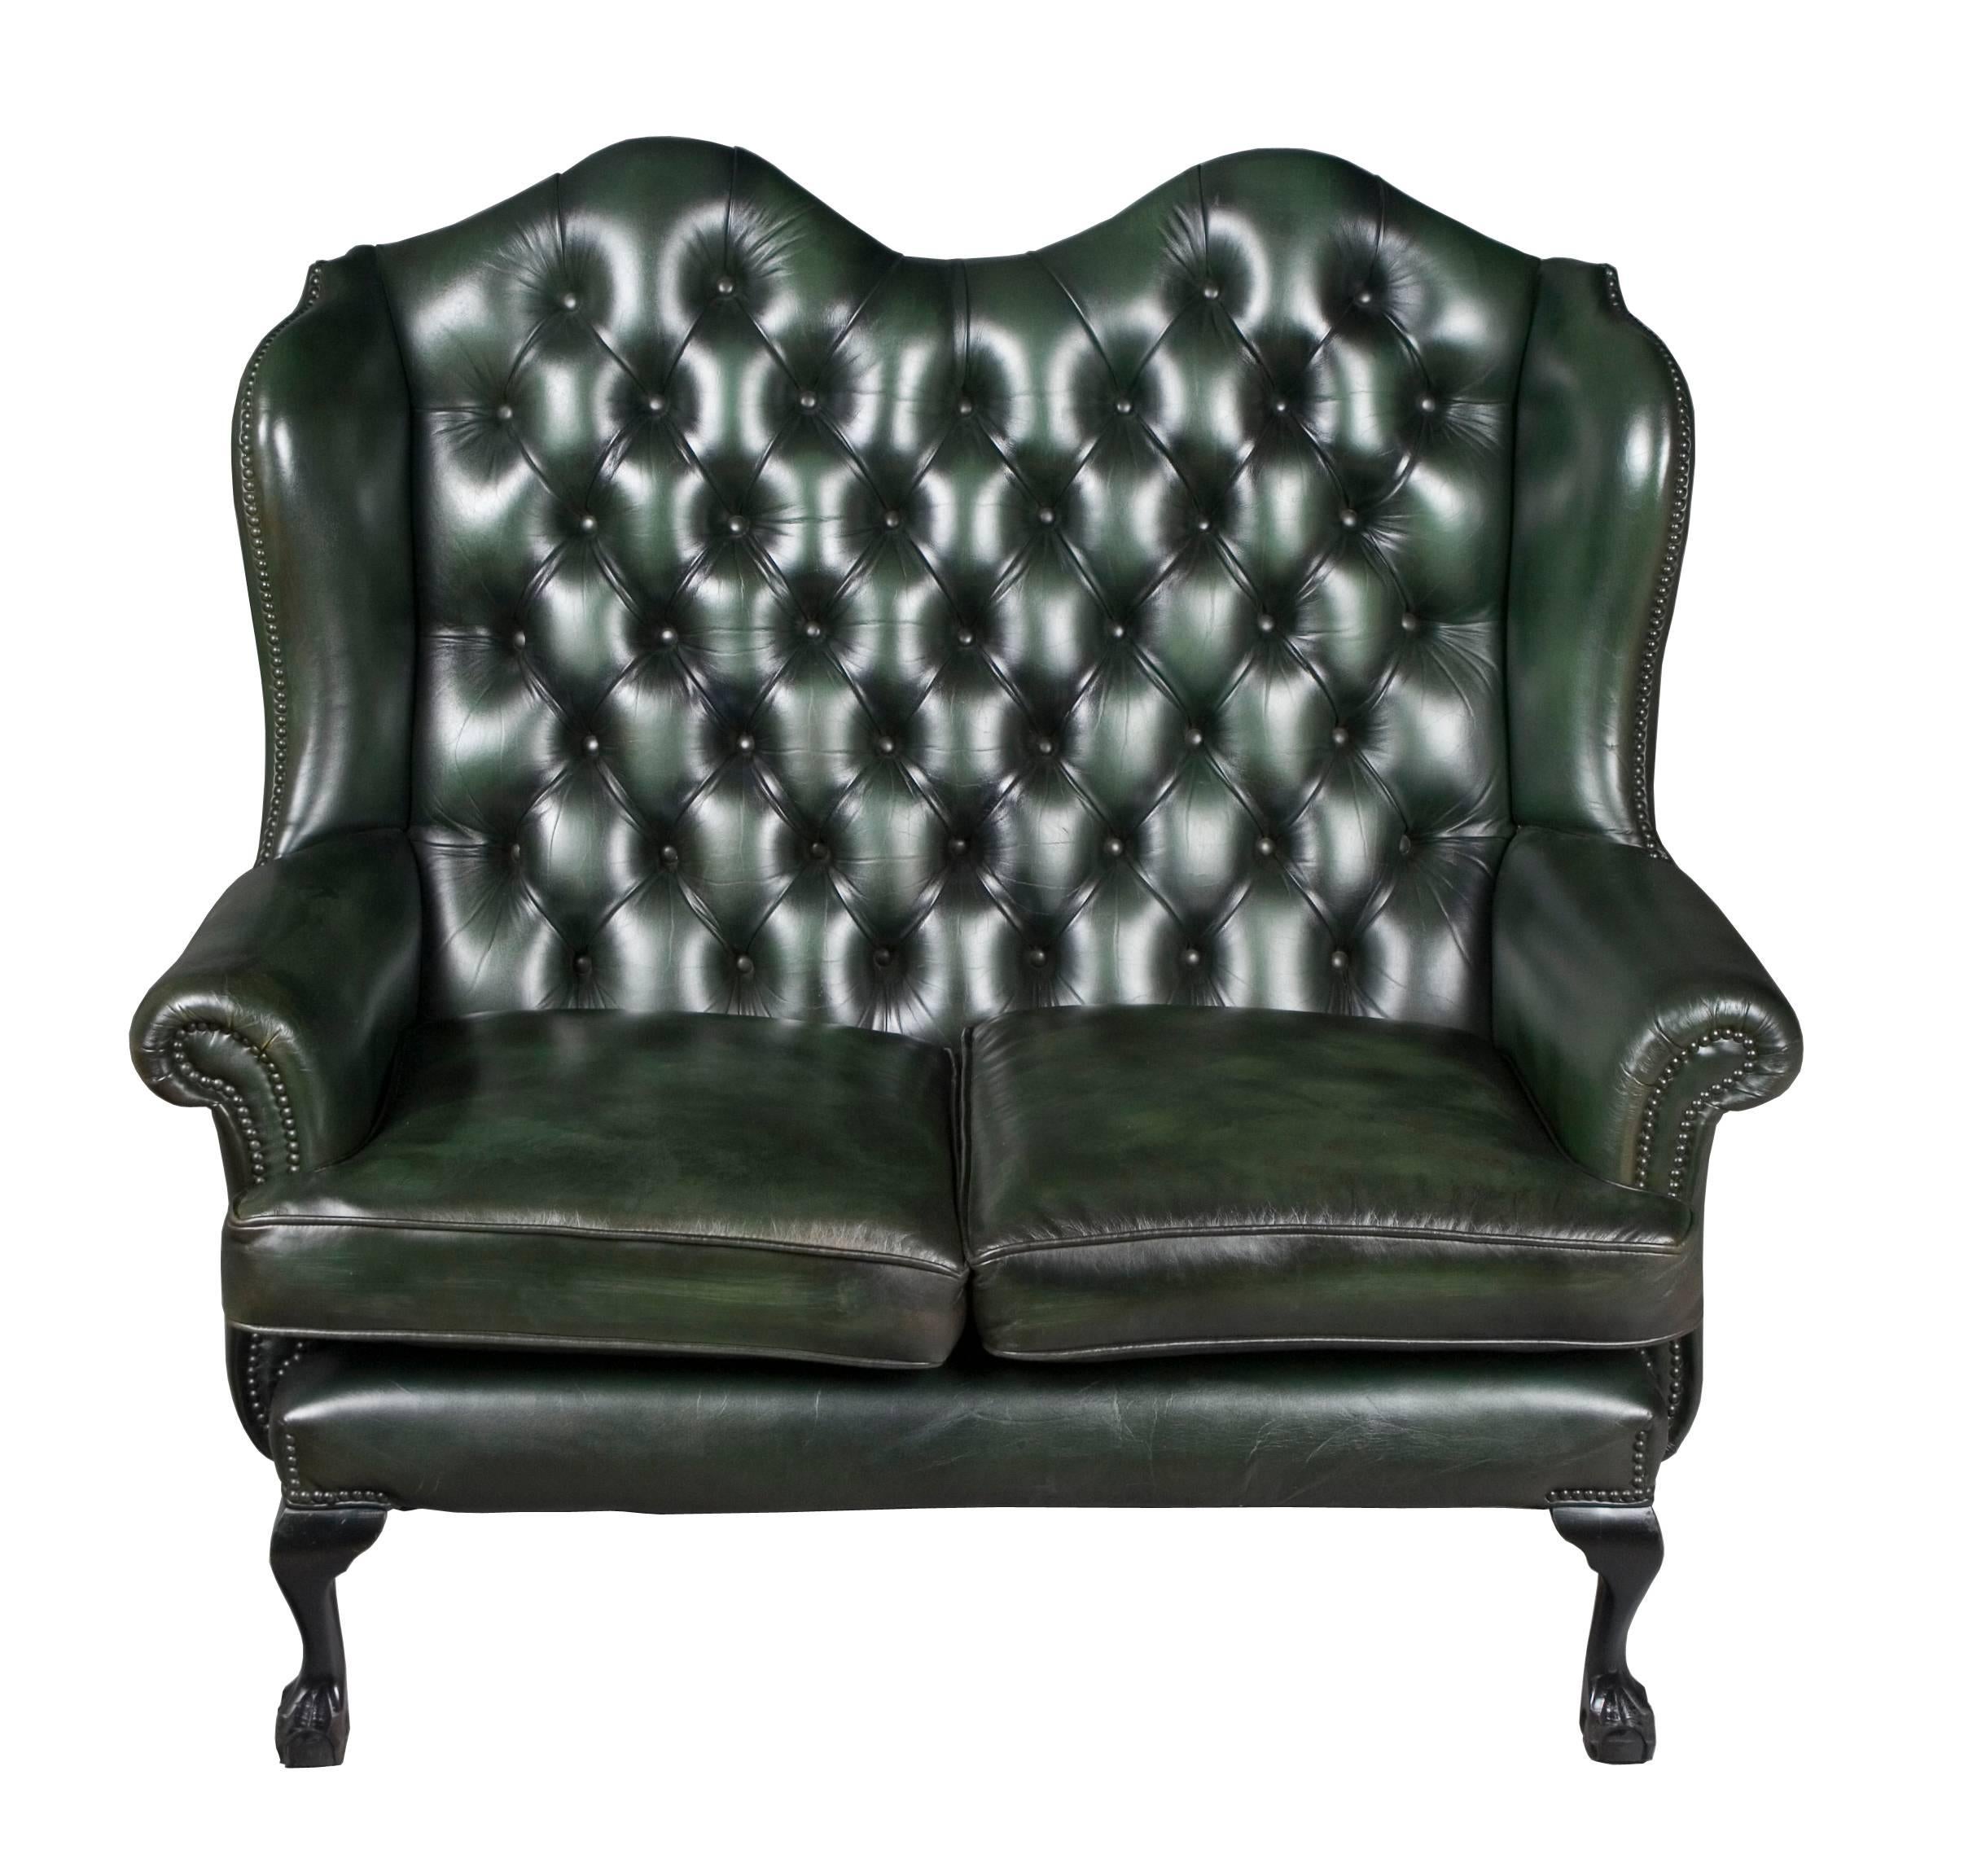 Vintage Green Tufted Leather Queen Anne Style Loveseat In Good Condition For Sale In Atlanta, GA